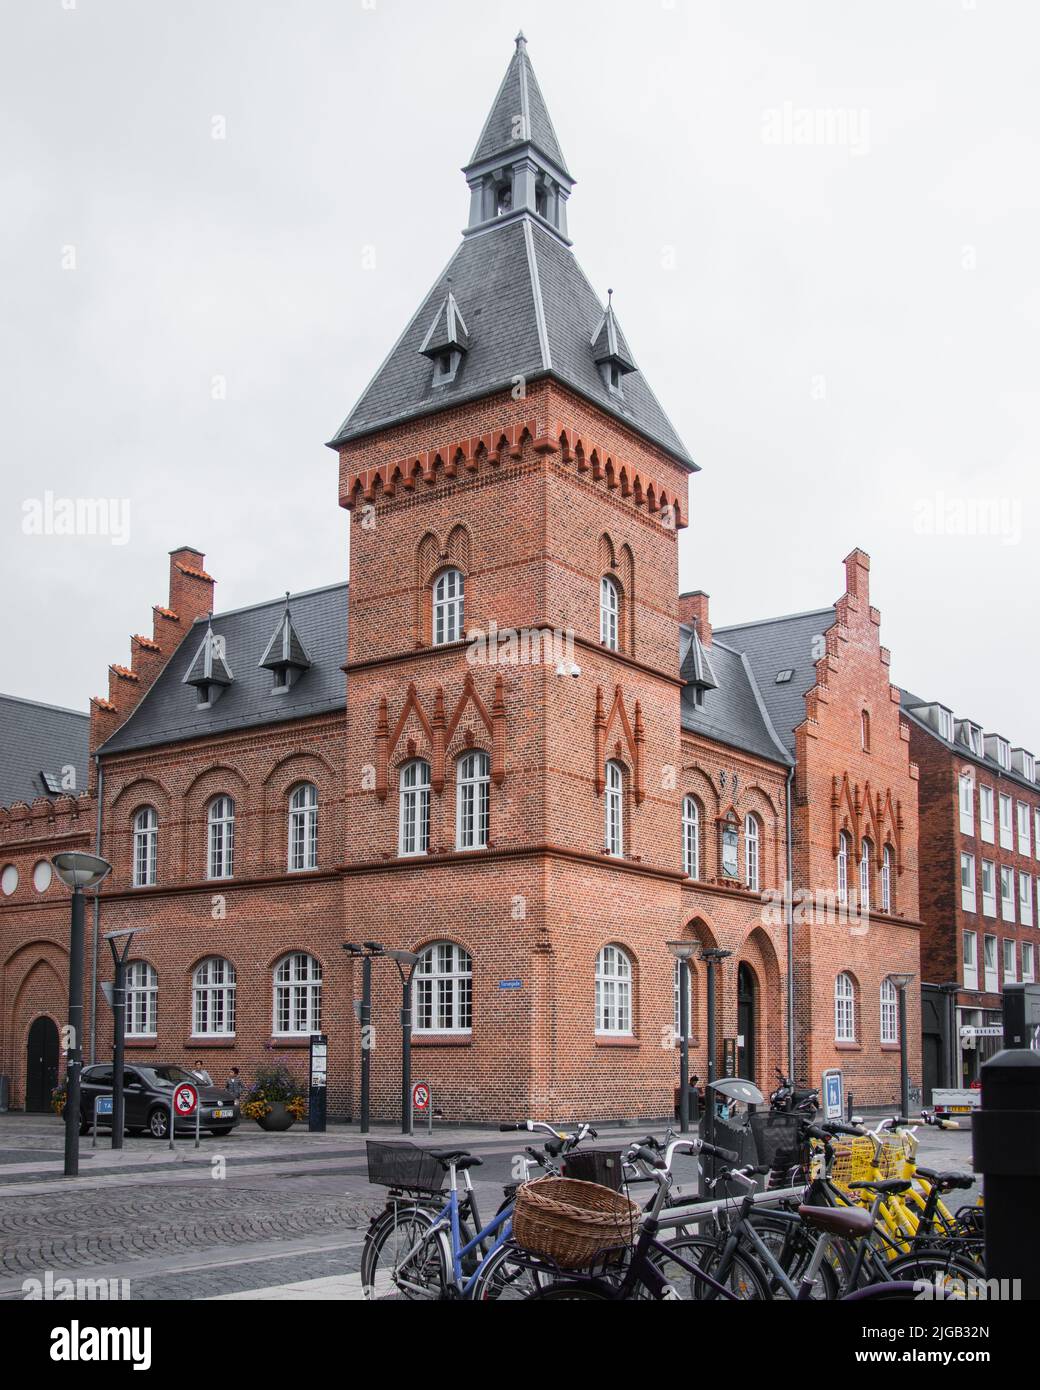 A typical Danish architecture in Esbjerg, a coastal city in Jutland, Denmark. Stock Photo